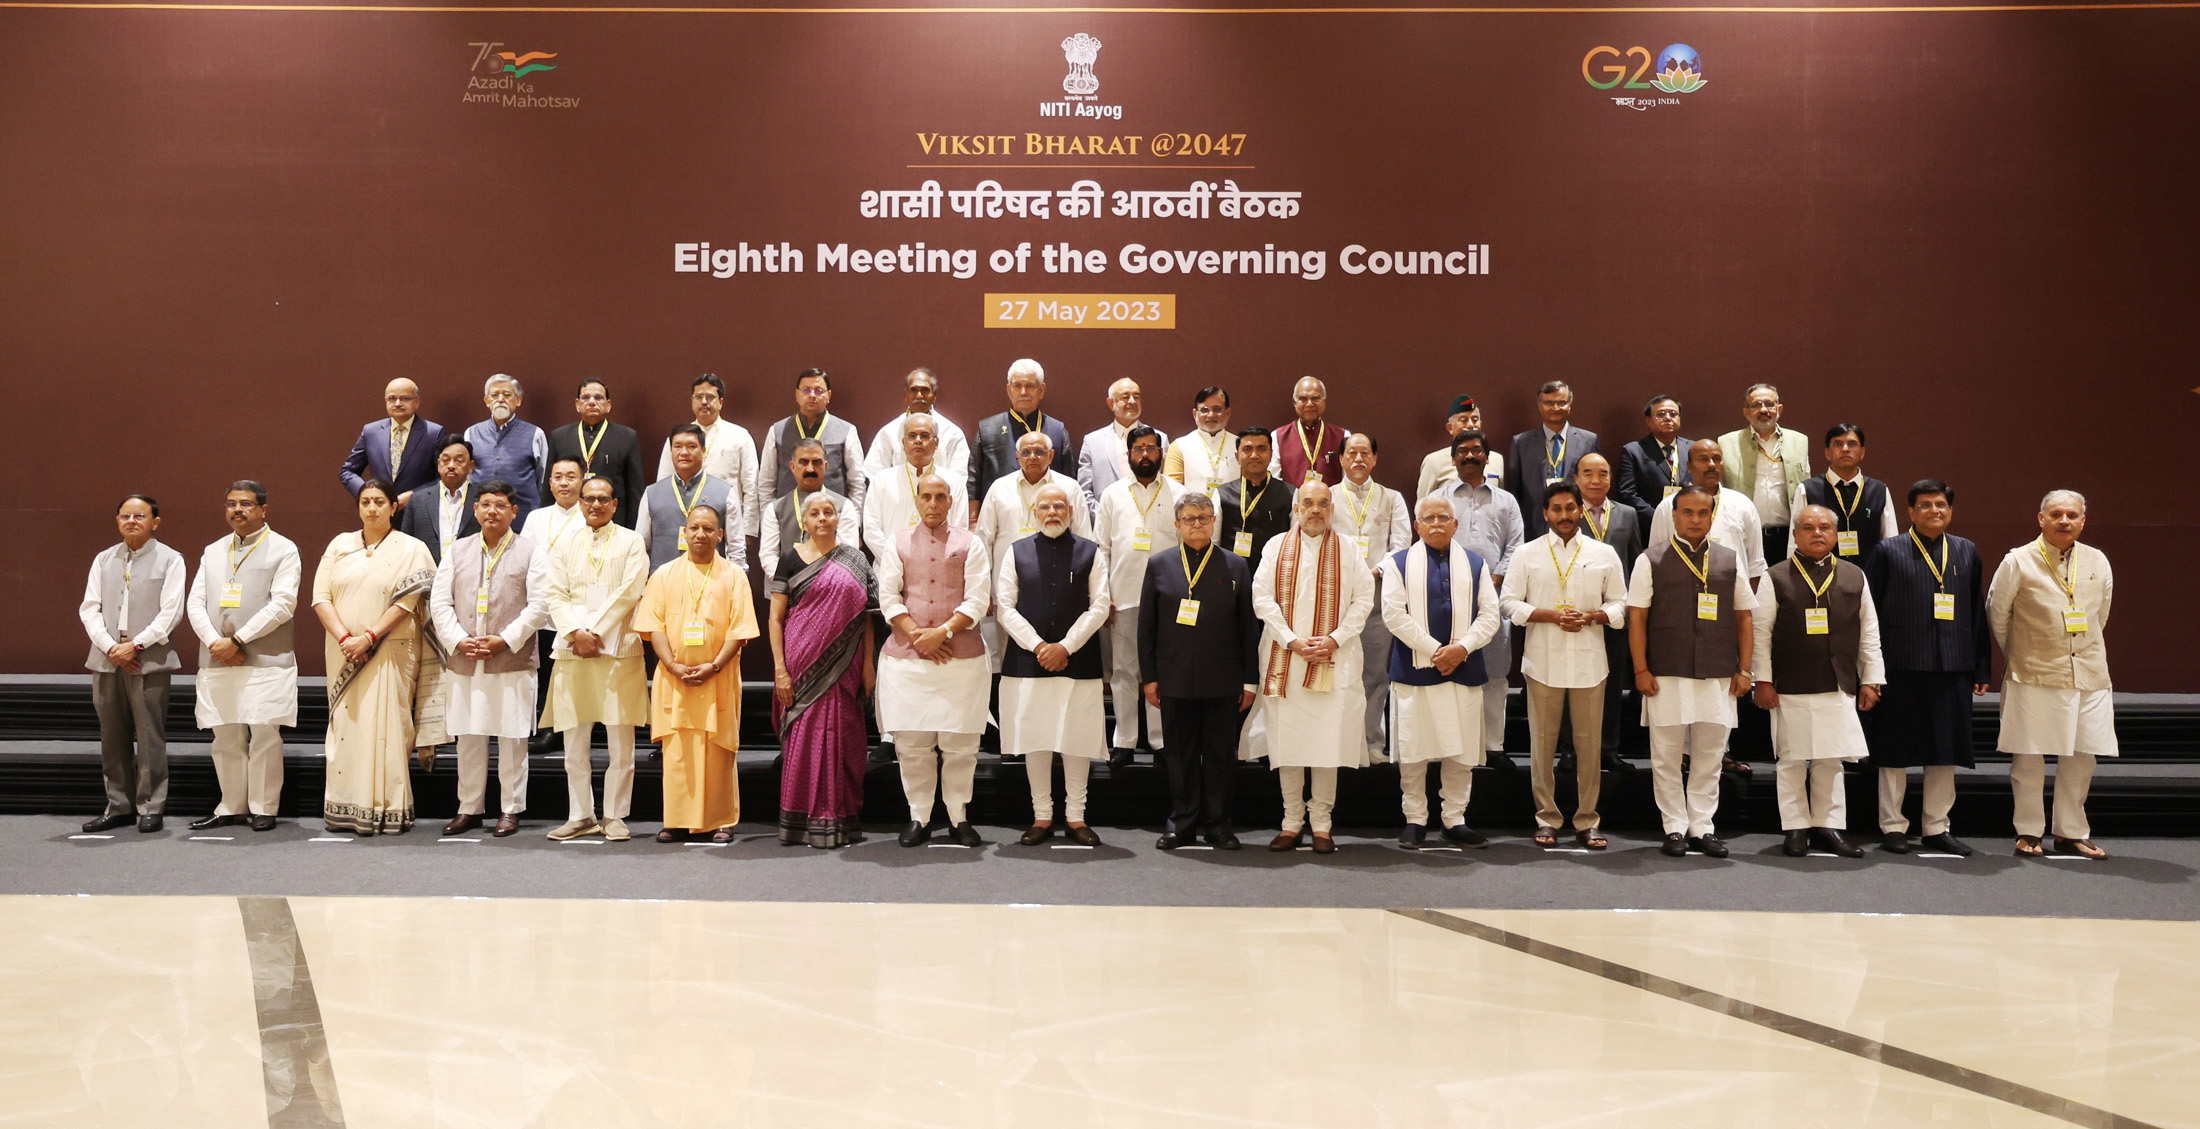 PM in a group photograph during the 8th Governing Council Meeting of NITI Aayog, in New Delhi on May 27, 2023.